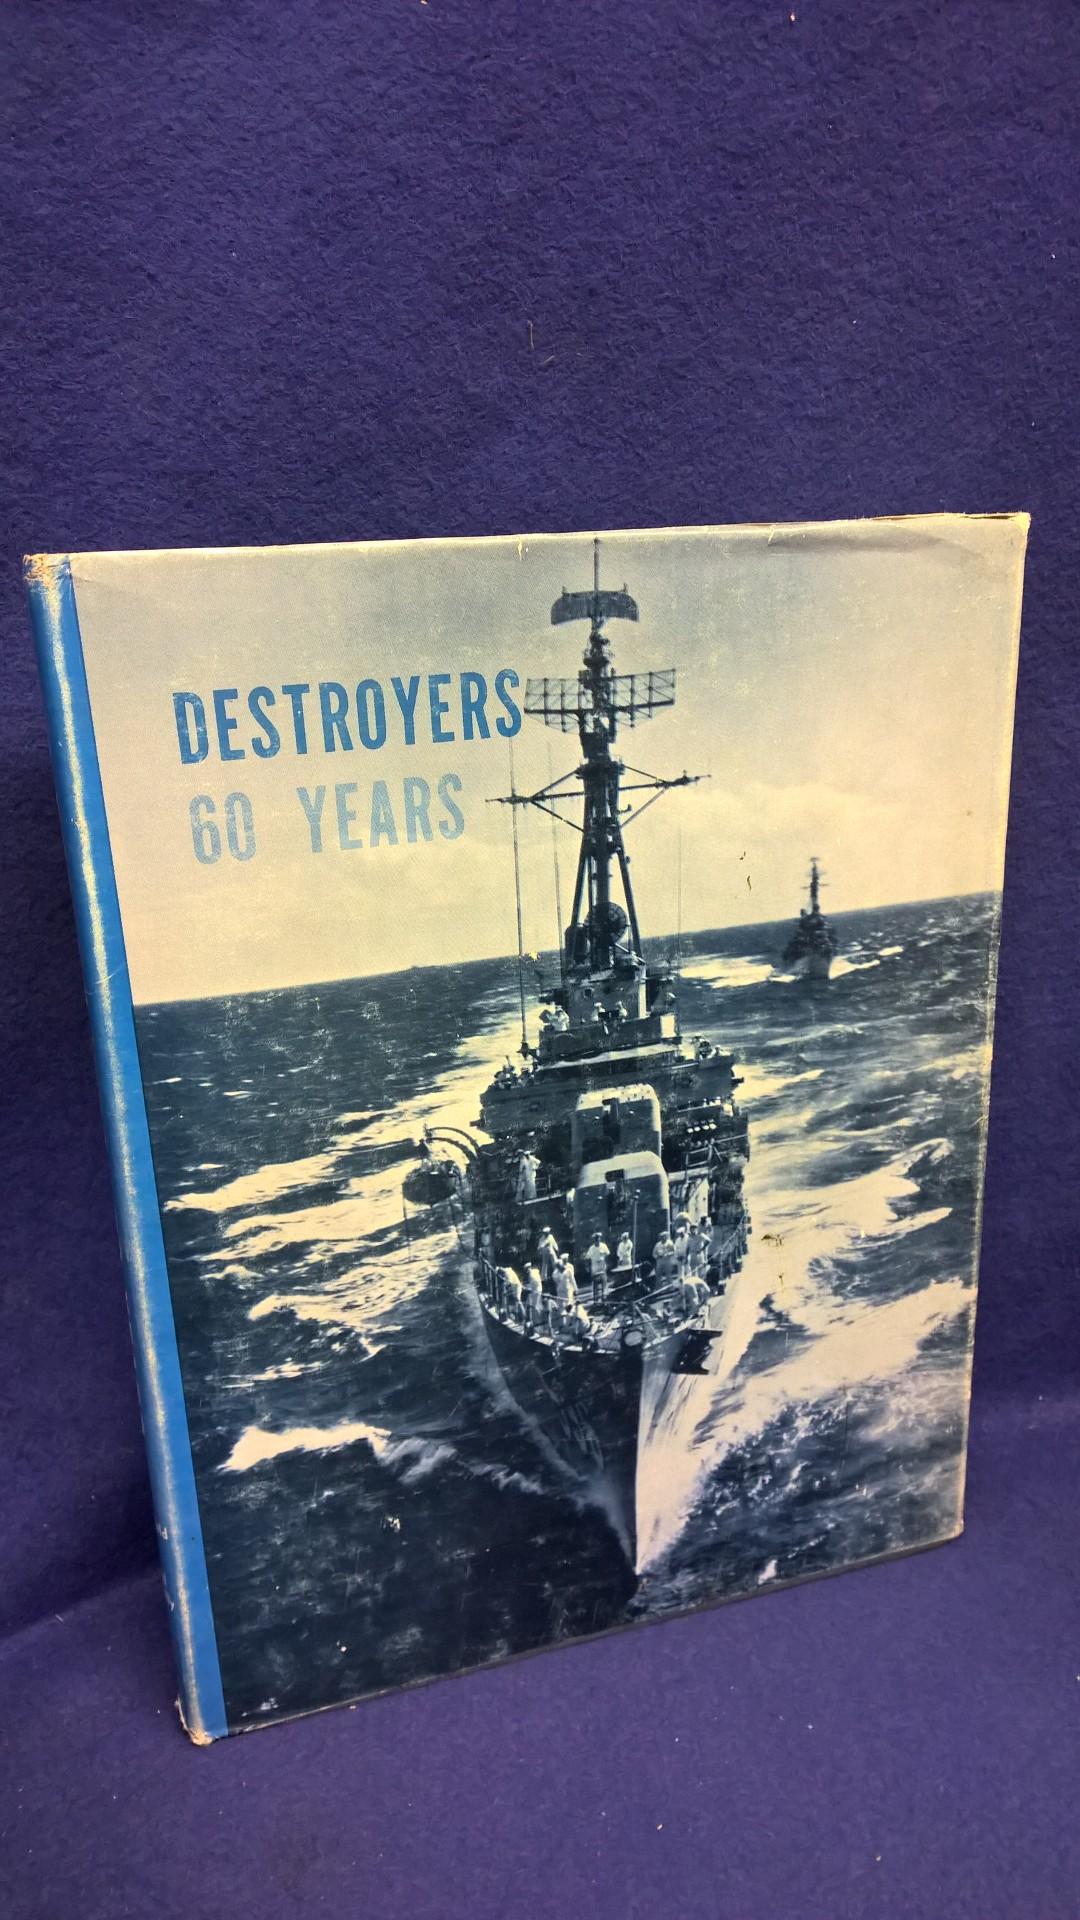 Destroyers - 60 Years.